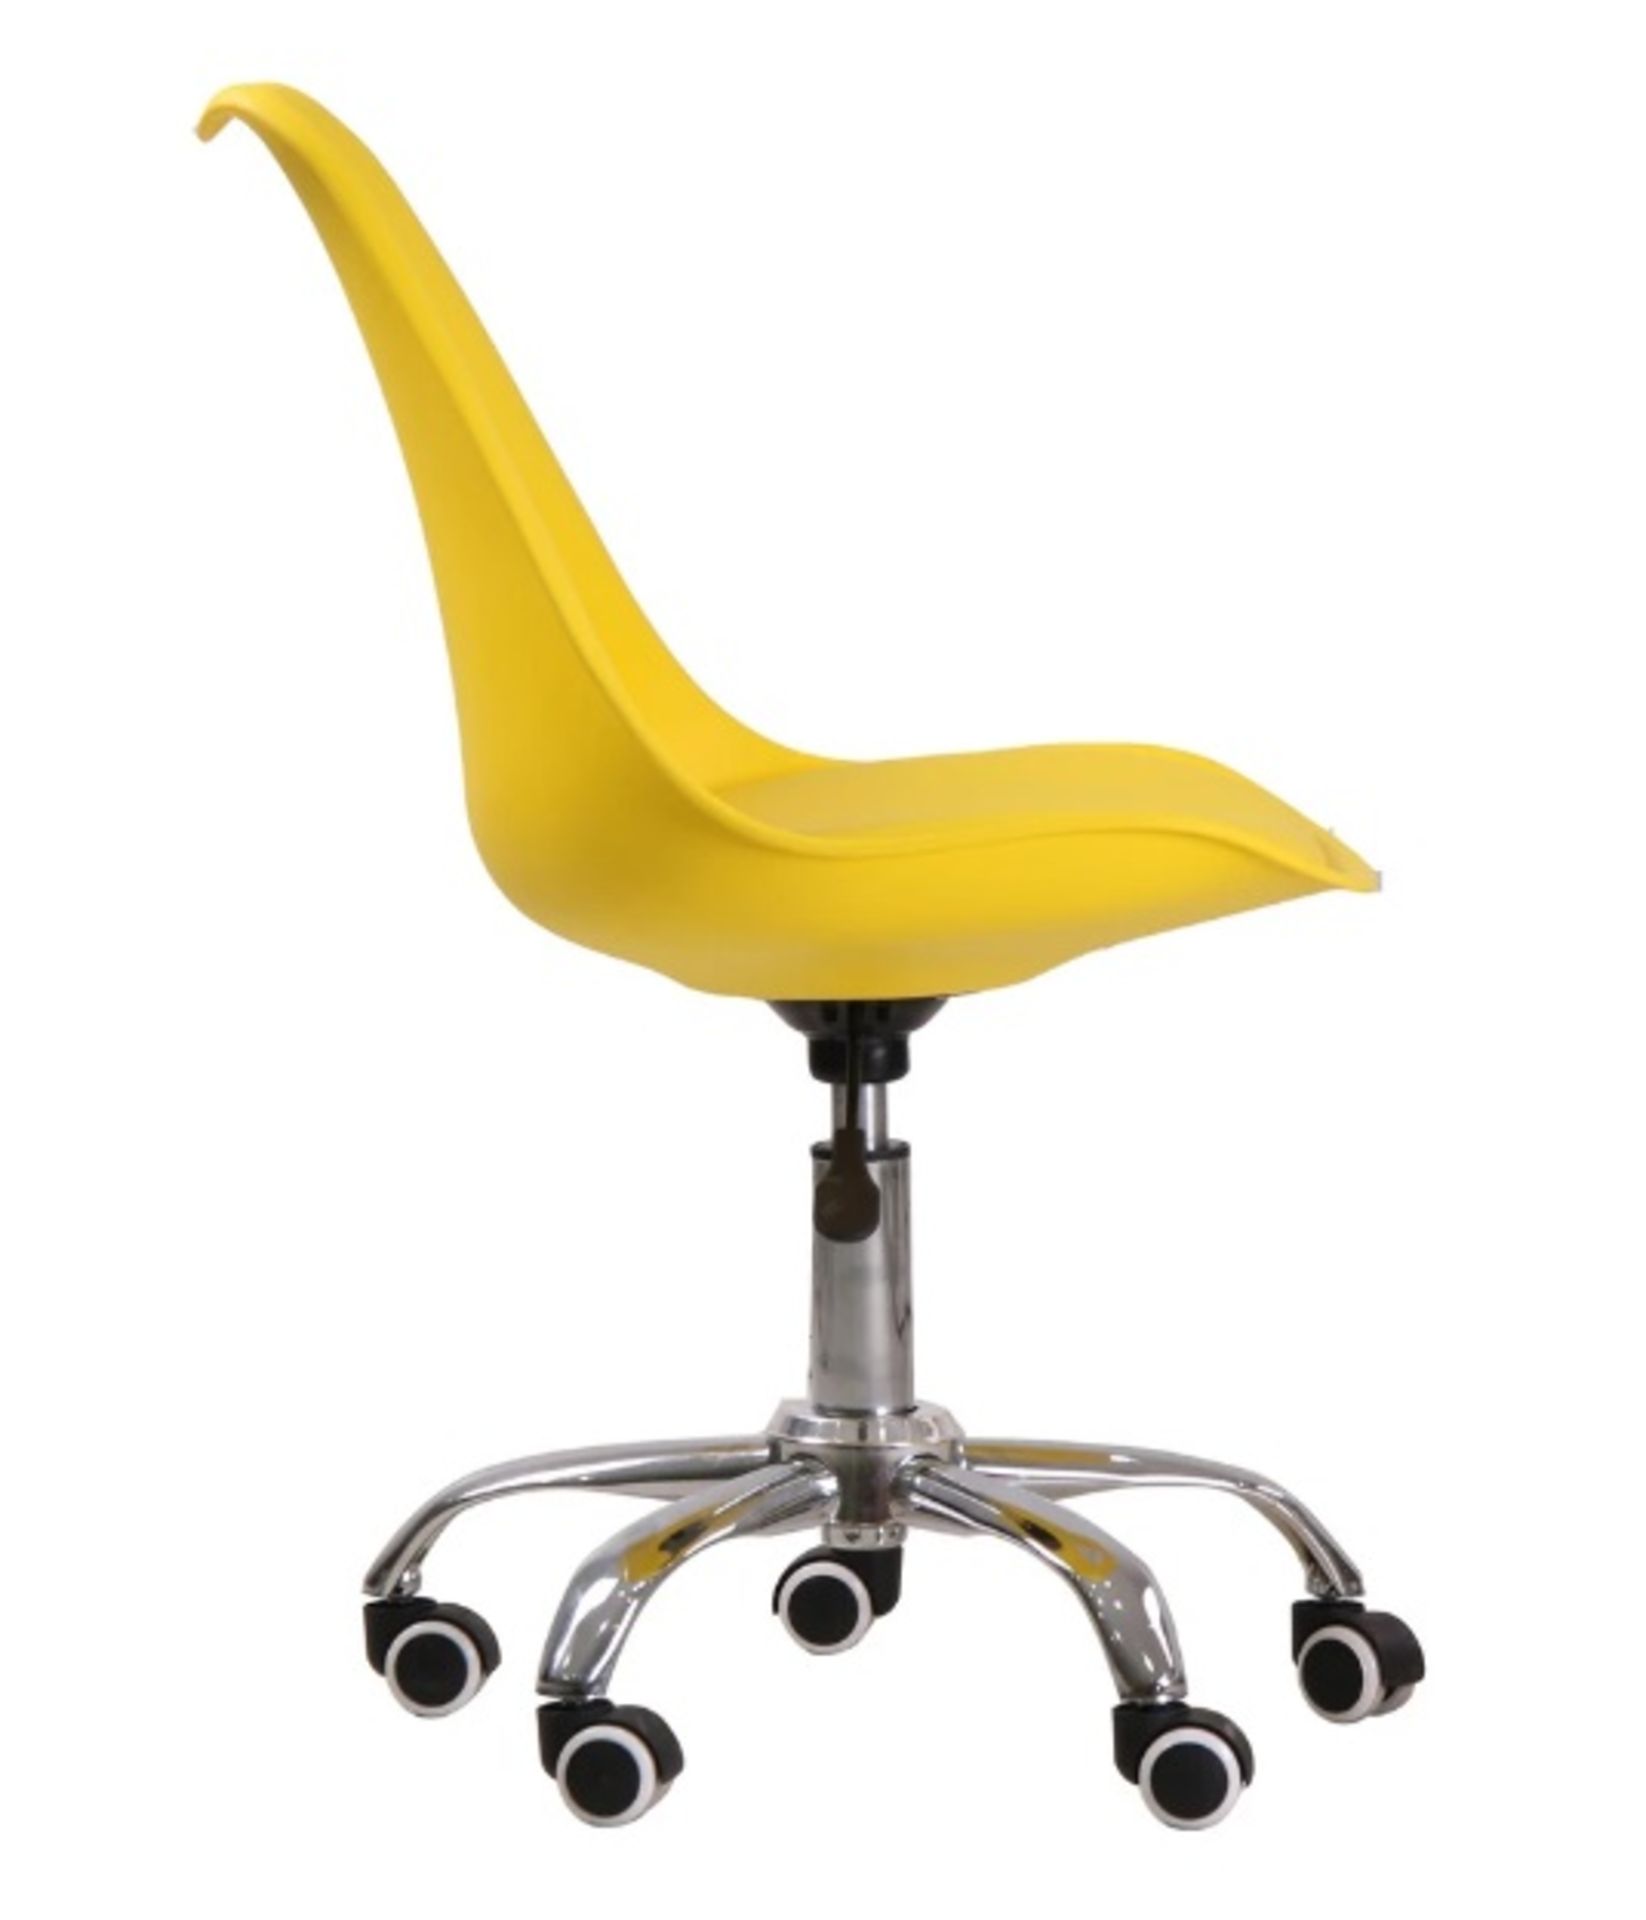 1 x Contemporary Adjustable Hydraulic Office Swivel Chair In Yellow With Chrome Base On Castors - Image 3 of 4